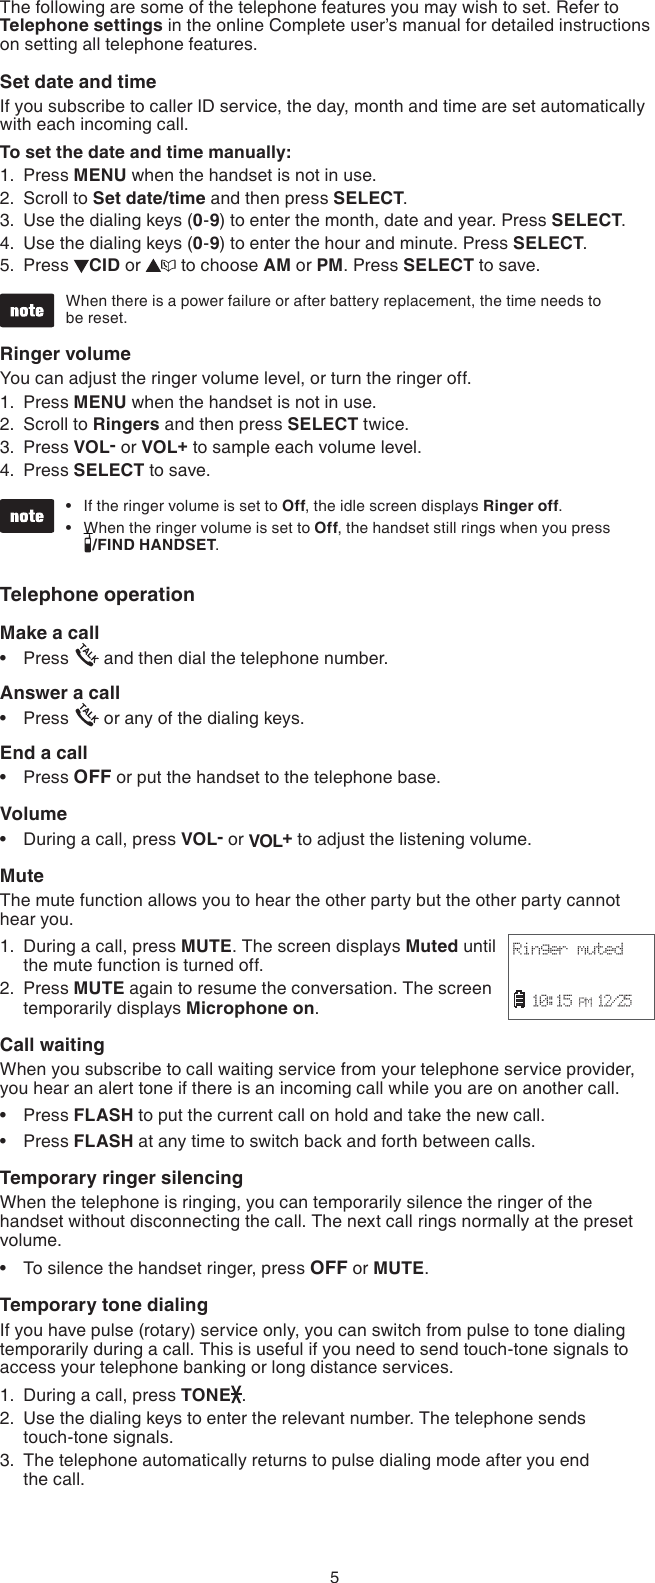 5The following are some of the telephone features you may wish to set. Refer to Telephone settings in the online Complete user’s manual for detailed instructions on setting all telephone features.Set date and time If you subscribe to caller ID service, the day, month and time are set automatically with each incoming call.To set the date and time manually:Press MENU when the handset is not in use.Scroll to Set date/time and then press SELECT.Use the dialing keys (0-9) to enter the month, date and year. Press SELECT.Use the dialing keys (0-9) to enter the hour and minute. Press SELECT.Press  CID or   to choose AM or PM. Press SELECT to save.When there is a power failure or after battery replacement, the time needs to  be reset.Ringer volumeYou can adjust the ringer volume level, or turn the ringer off.Press MENU when the handset is not in use.Scroll to Ringers and then press SELECT twice.Press VOL- or VOL+ to sample each volume level.Press SELECT to save.If the ringer volume is set to Off, the idle screen displays Ringer off.When the ringer volume is set to Off, the handset still rings when you press  /FIND HANDSET.Telephone operationMake a callPress   and then dial the telephone number.Answer a callPress   or any of the dialing keys.End a callPress OFF or put the handset to the telephone base.VolumeDuring a call, press VOL- or VOL+ to adjust the listening volume.MuteThe mute function allows you to hear the other party but the other party cannot hear you.During a call, press MUTE. The screen displays Muted until the mute function is turned off.Press MUTE again to resume the conversation. The screen temporarily displays Microphone on.Call waitingWhen you subscribe to call waiting service from your telephone service provider, you hear an alert tone if there is an incoming call while you are on another call. Press FLASH to put the current call on hold and take the new call.Press FLASH at any time to switch back and forth between calls.Temporary ringer silencingWhen the telephone is ringing, you can temporarily silence the ringer of the handset without disconnecting the call. The next call rings normally at the preset volume.To silence the handset ringer, press OFF or MUTE.Temporary tone dialingIf you have pulse (rotary) service only, you can switch from pulse to tone dialing temporarily during a call. This is useful if you need to send touch-tone signals to access your telephone banking or long distance services.During a call, press TONE .Use the dialing keys to enter the relevant number. The telephone sends  touch-tone signals.The telephone automatically returns to pulse dialing mode after you end  the call.1.2.3.4.5.1.2.3.4.••••••1.2.•••1.2.3.Ringer muted  10:15 PM 12/25